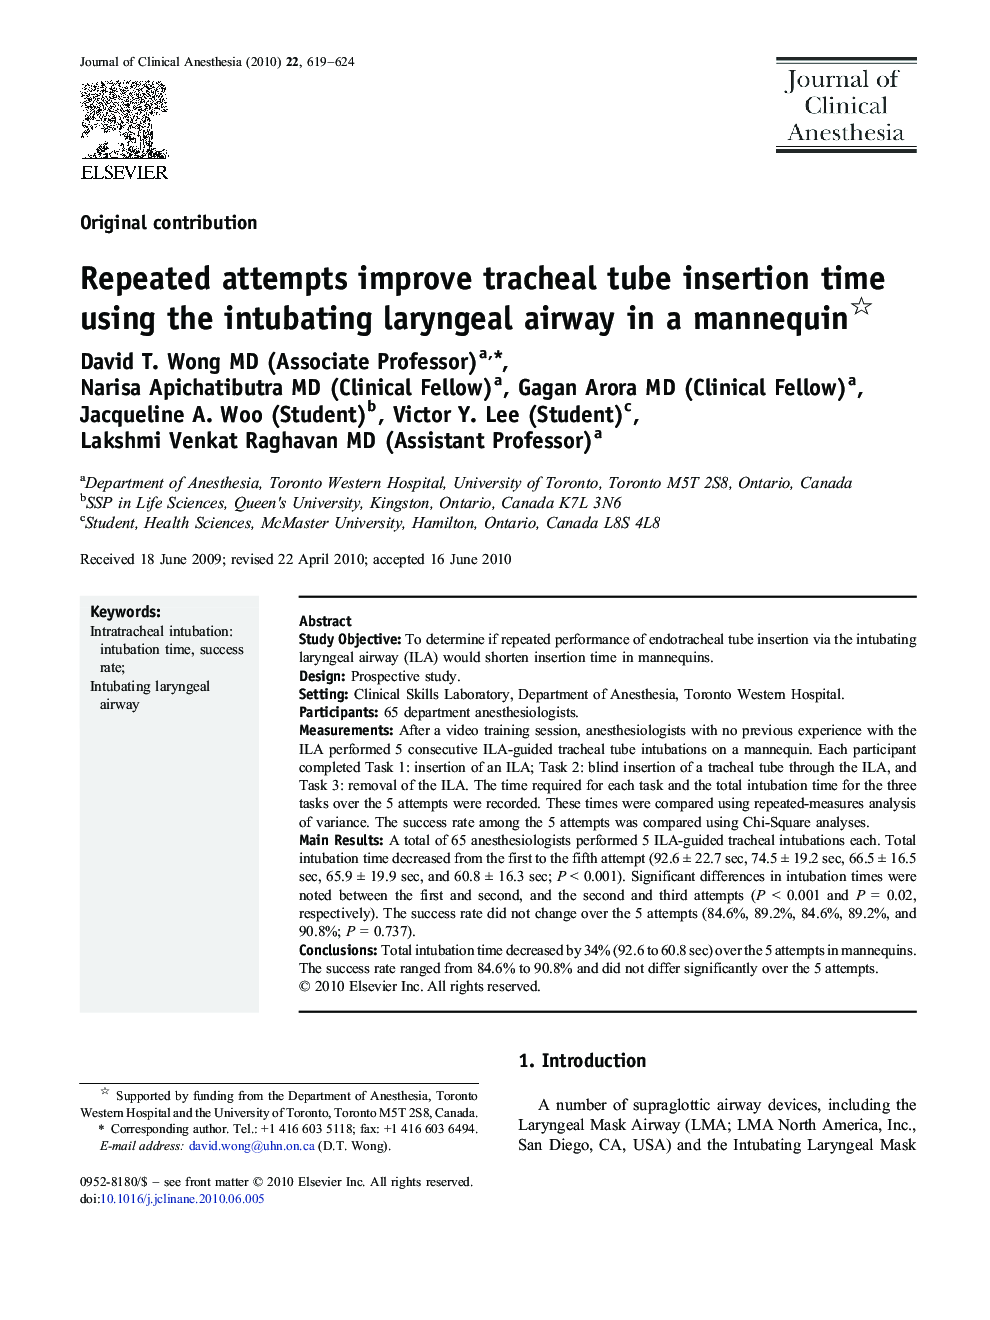 Repeated attempts improve tracheal tube insertion time using the intubating laryngeal airway in a mannequin